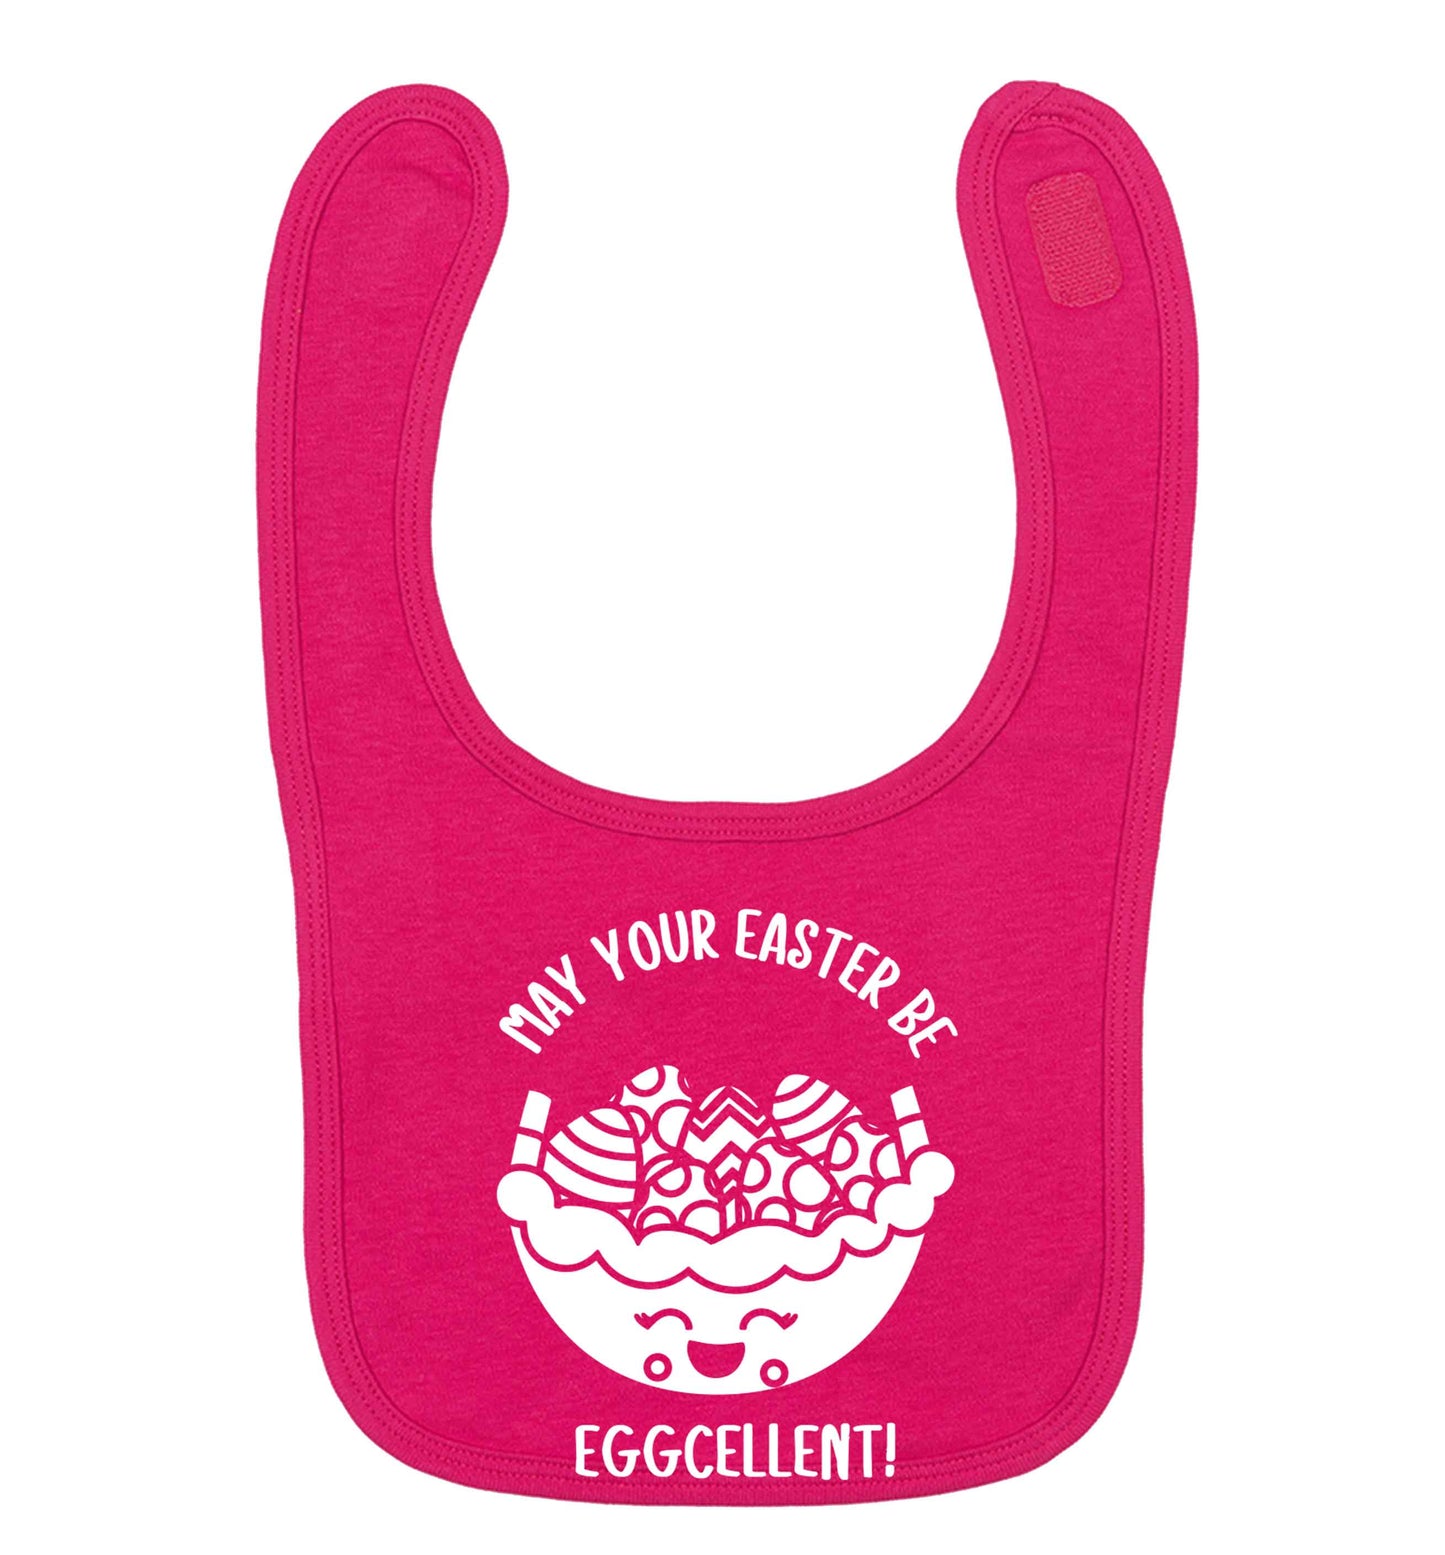 May your Easter be eggcellent dark pink baby bib